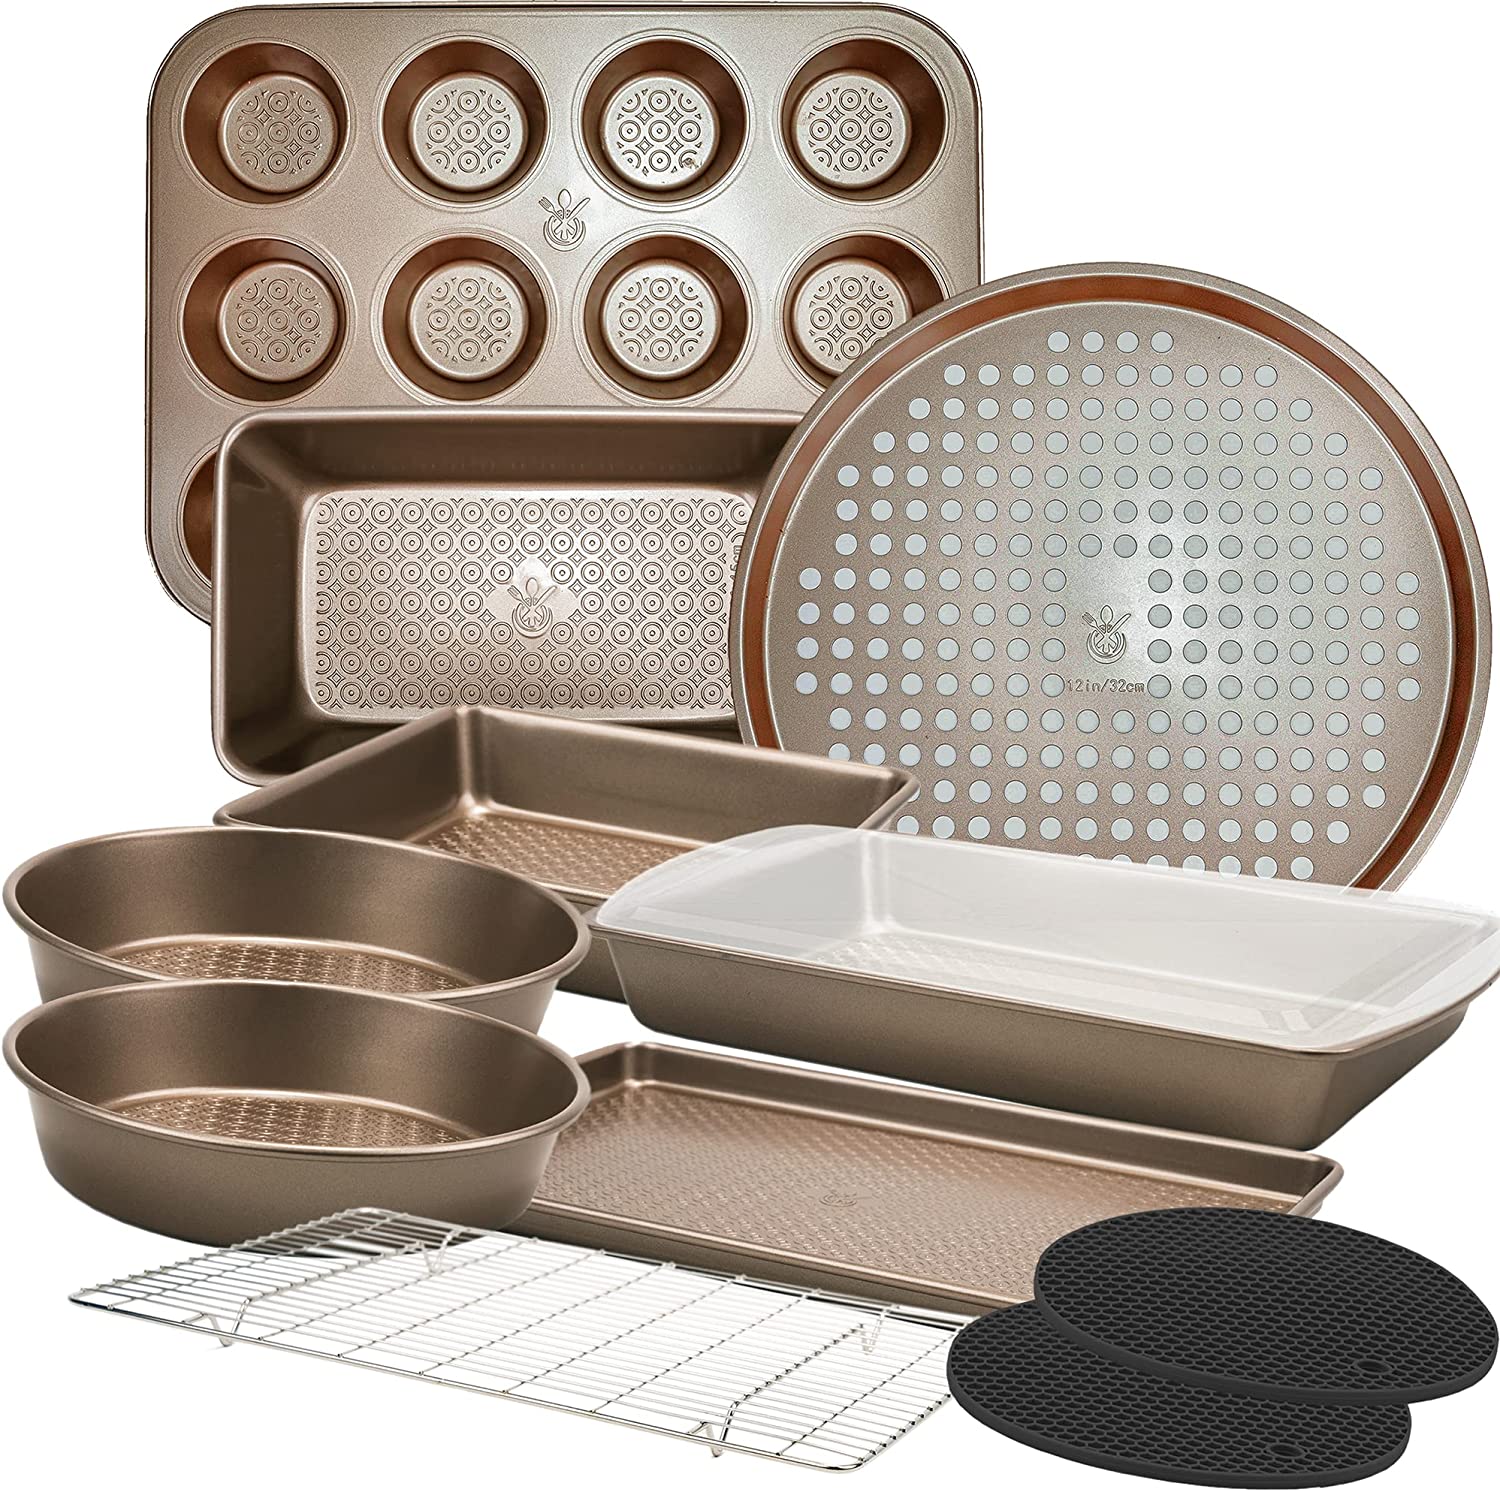 The Best Baking Pans  How to Choose the best bakeware 